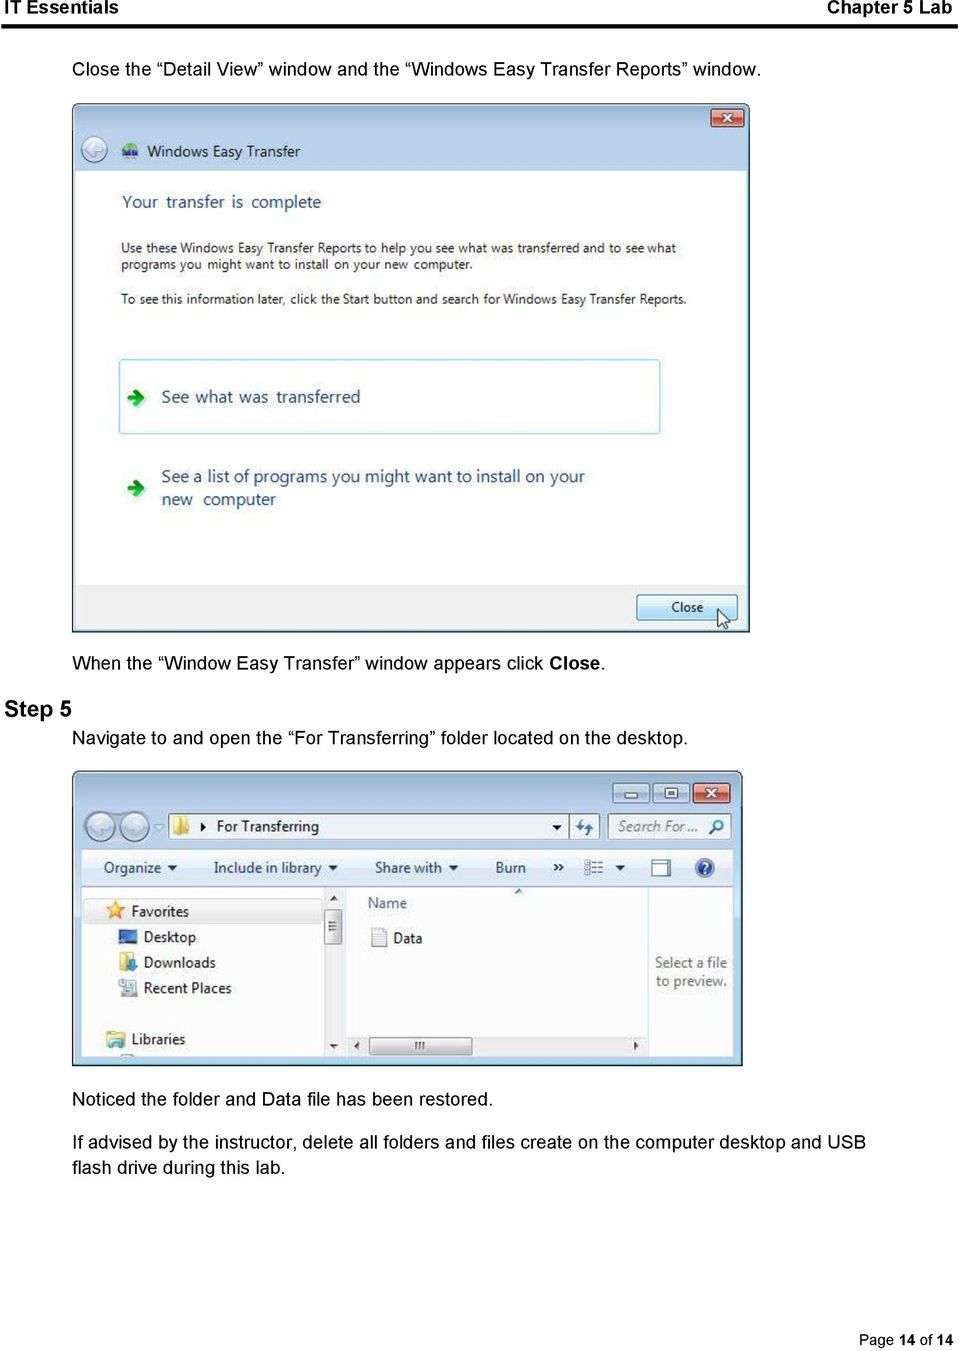 Step 5 Navigate to and open the For Transferring folder located on the desktop.